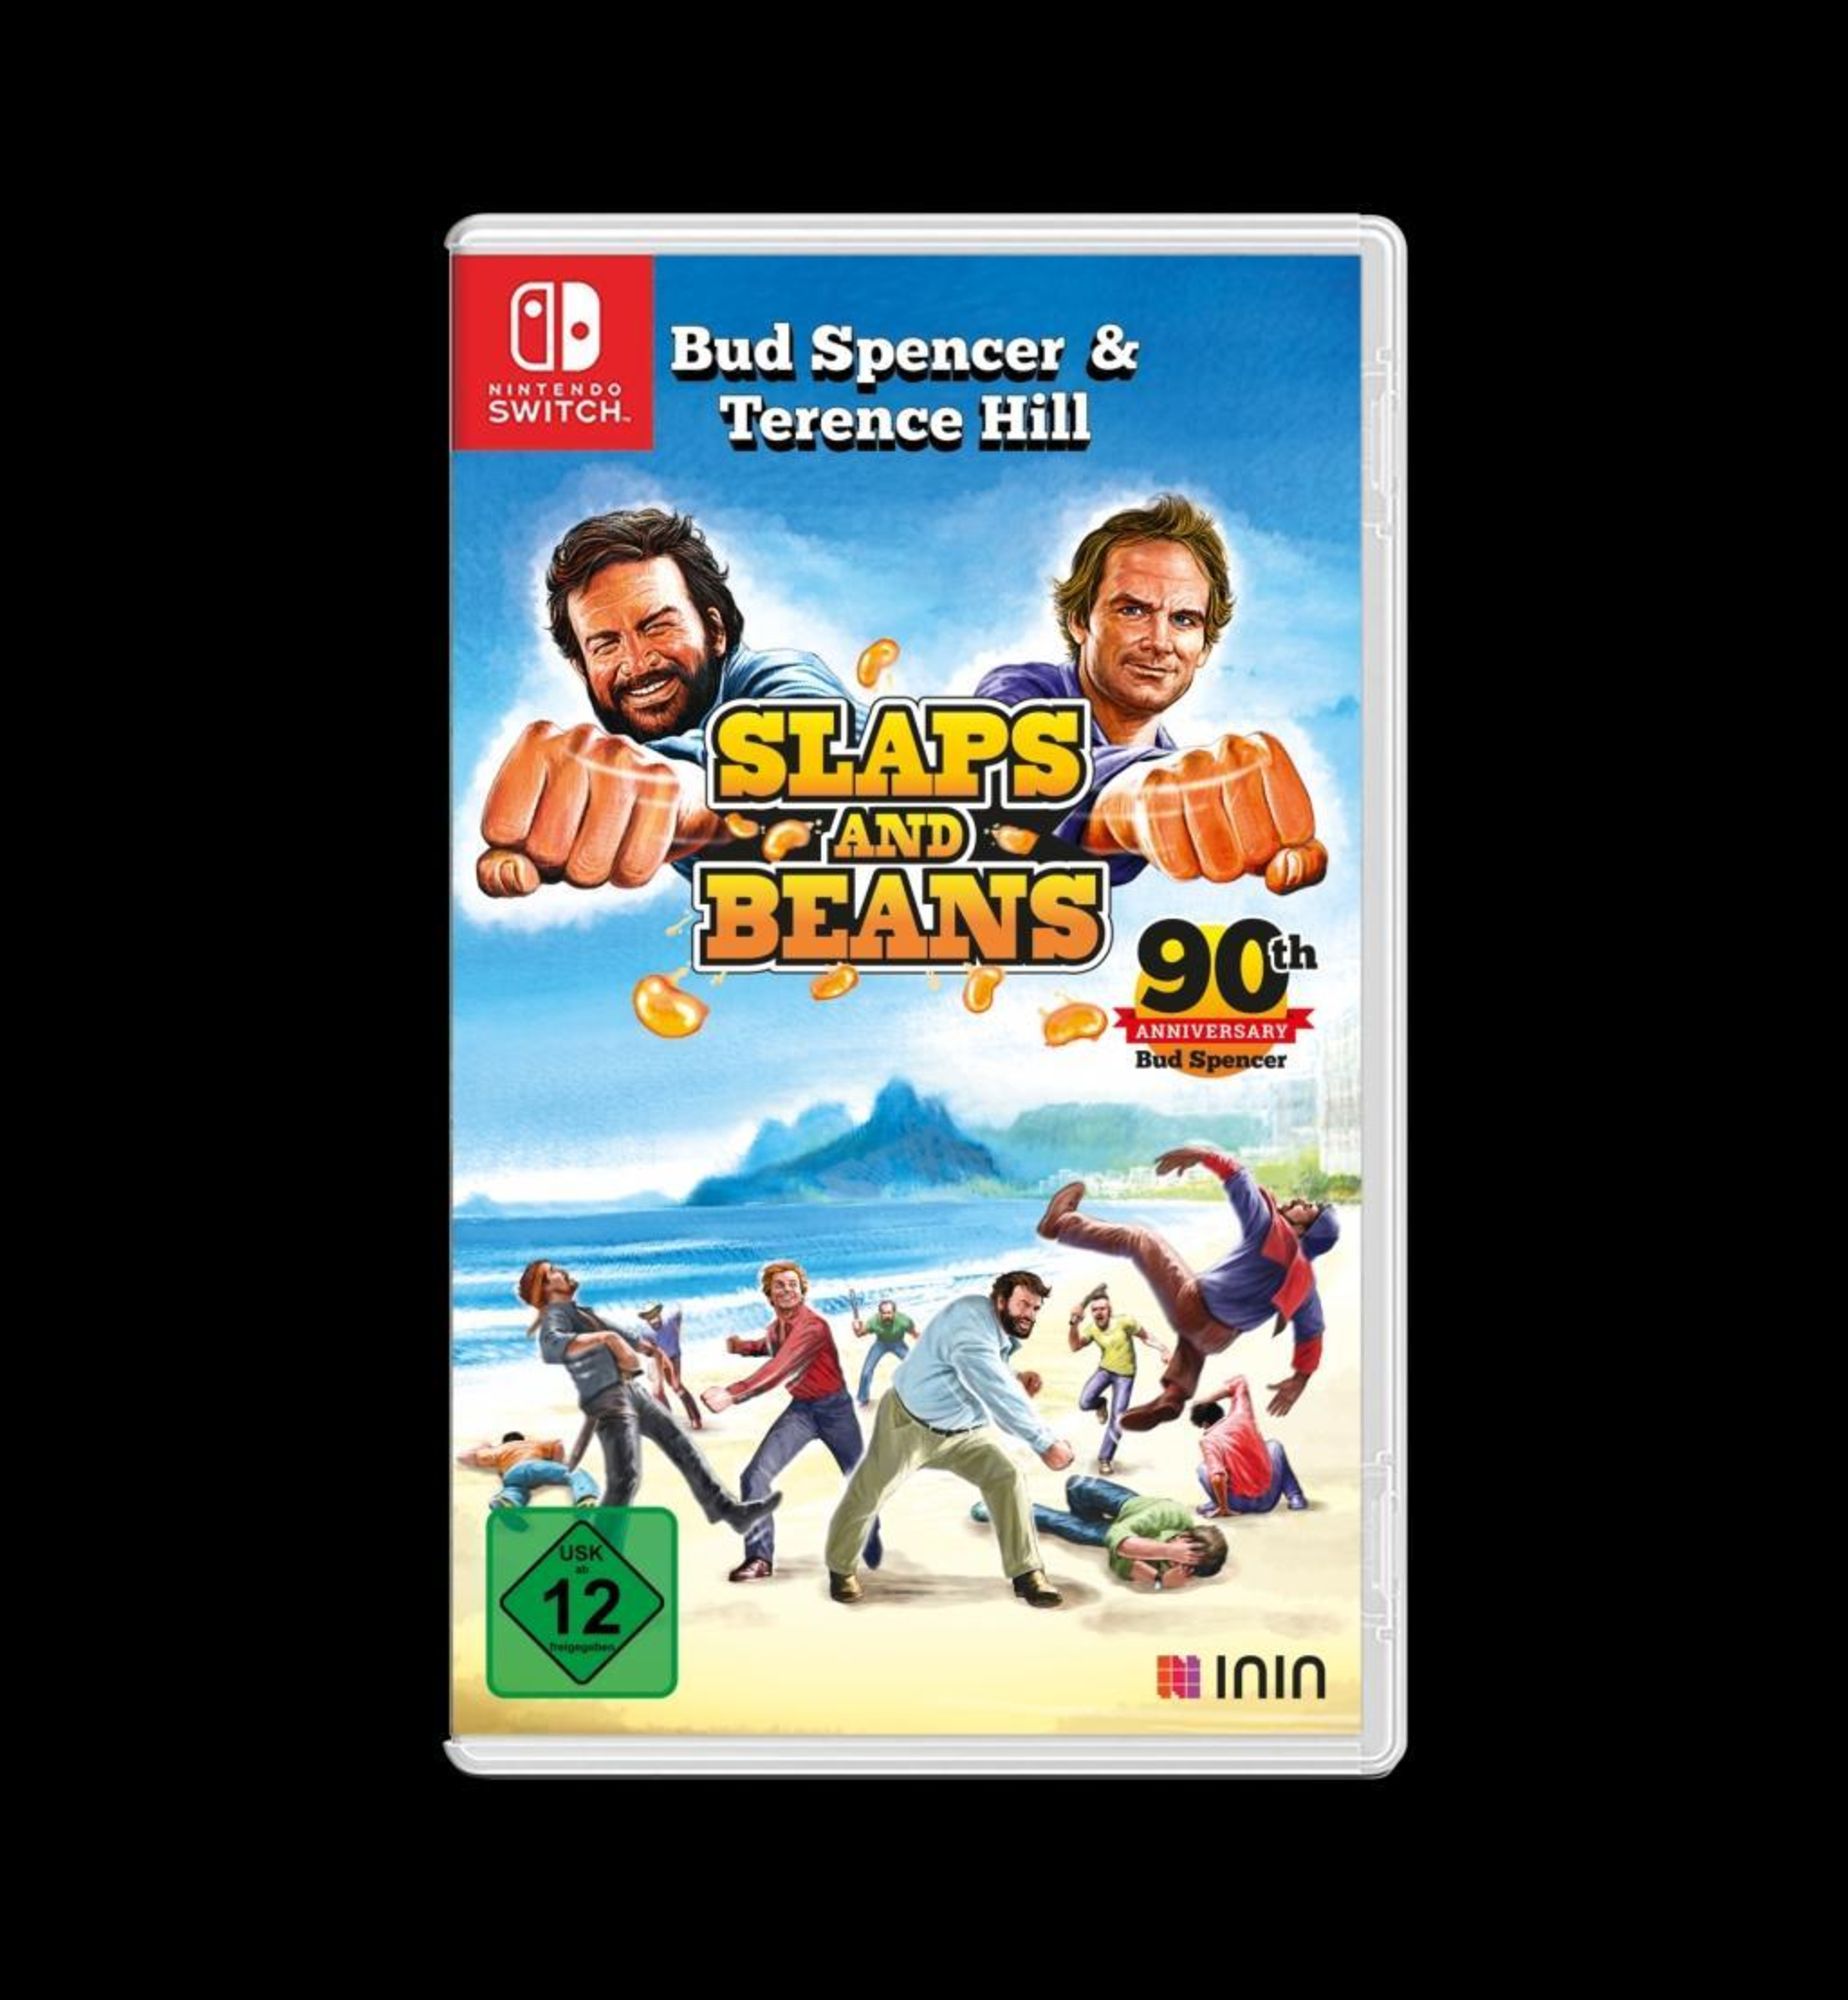 Bud Spencer & Terence - Slaps \'Nintendo Beans\' and kaufen Hill Switch\' für